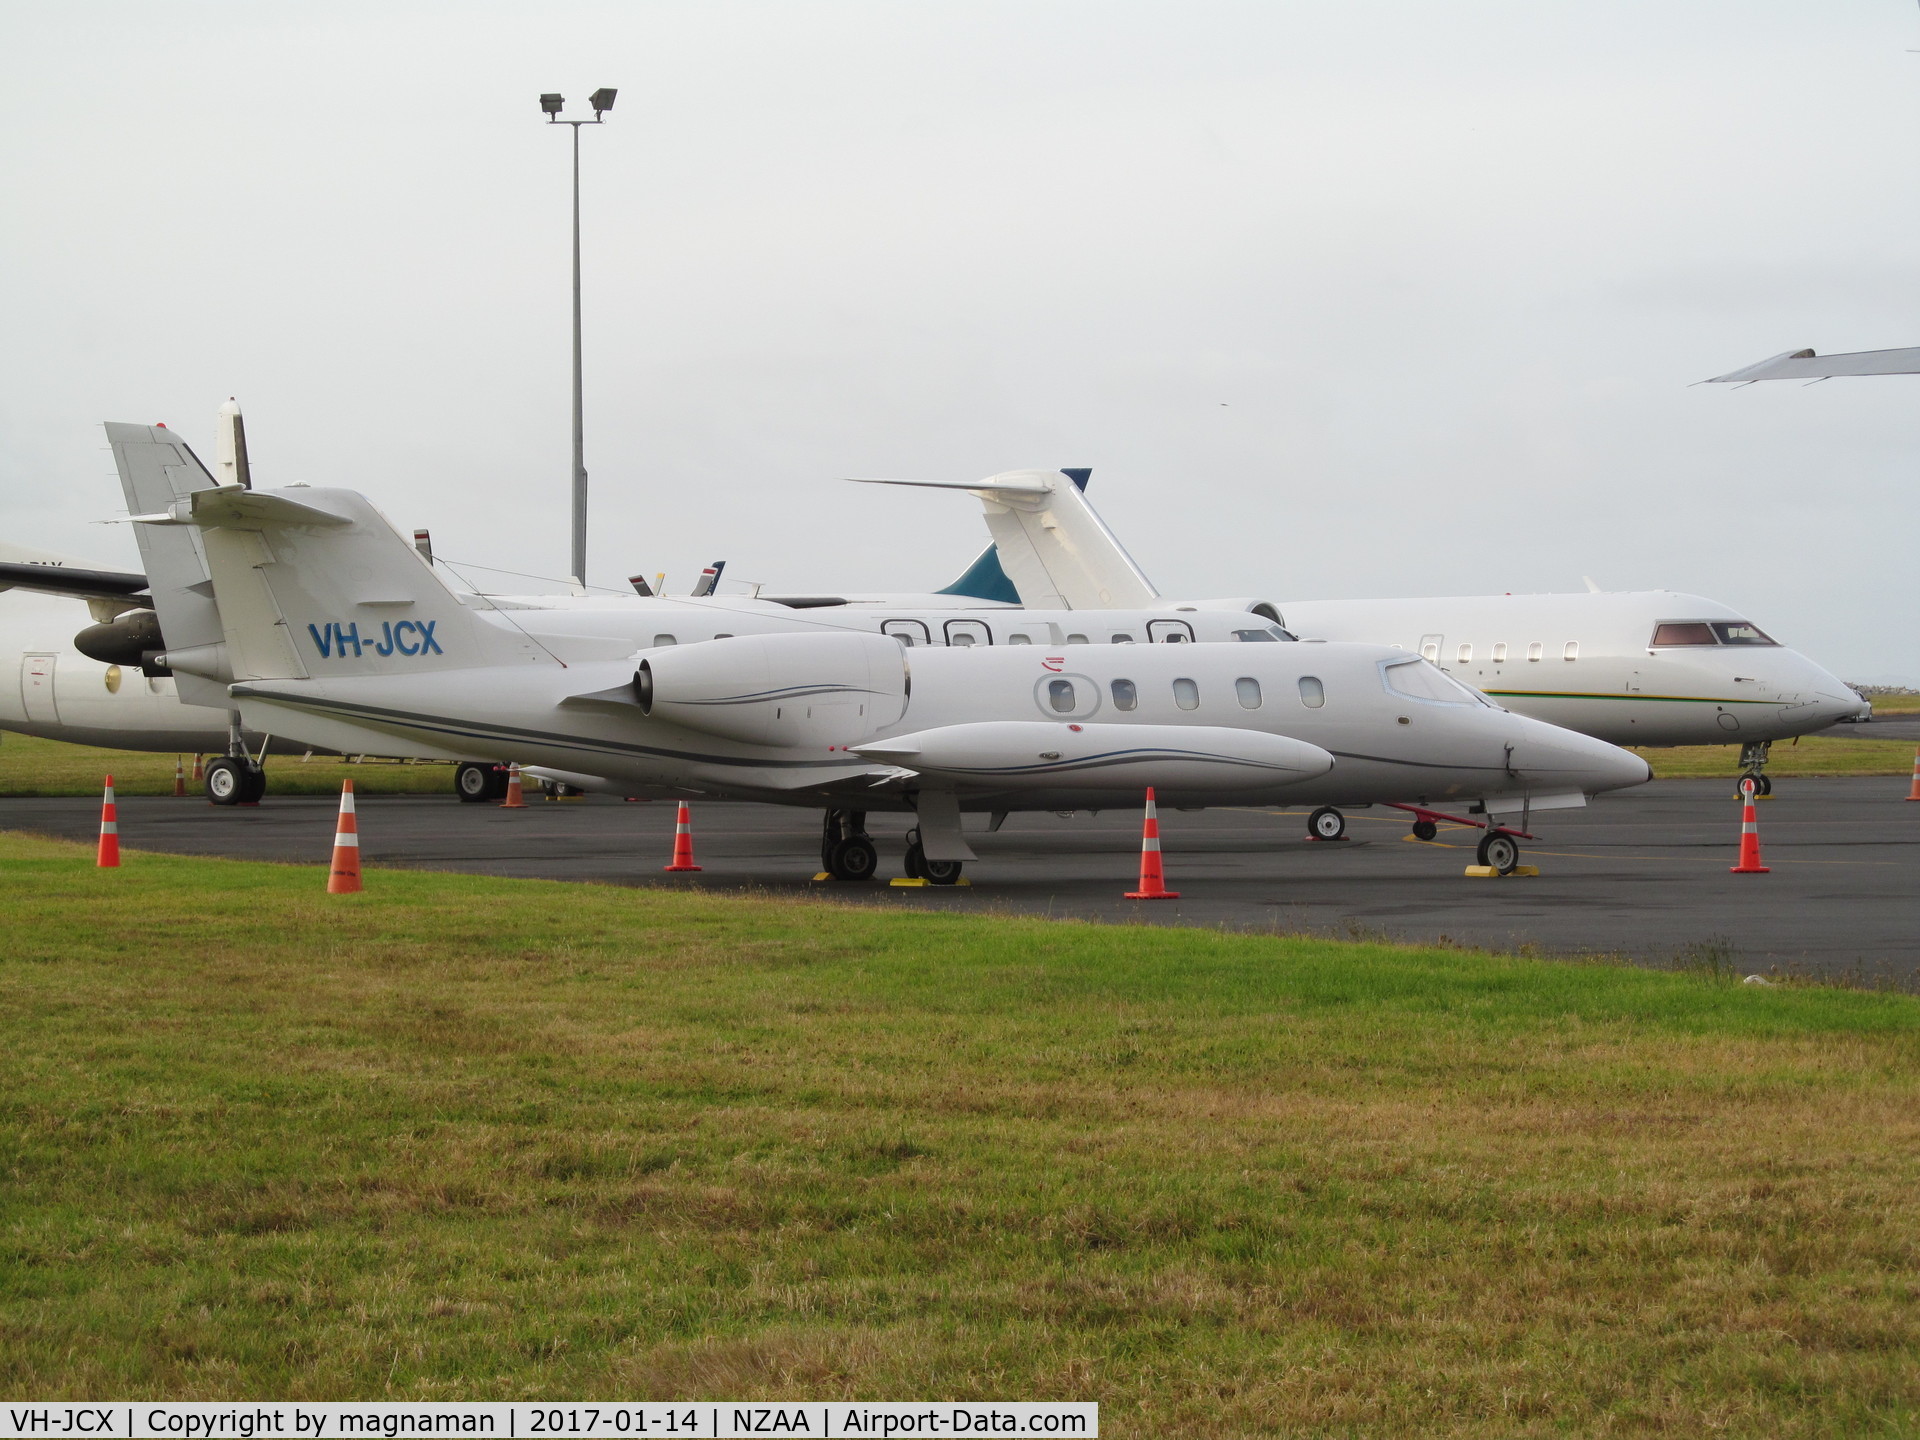 VH-JCX, 1986 Gates Learjet 36A C/N 36A-057, moved to 